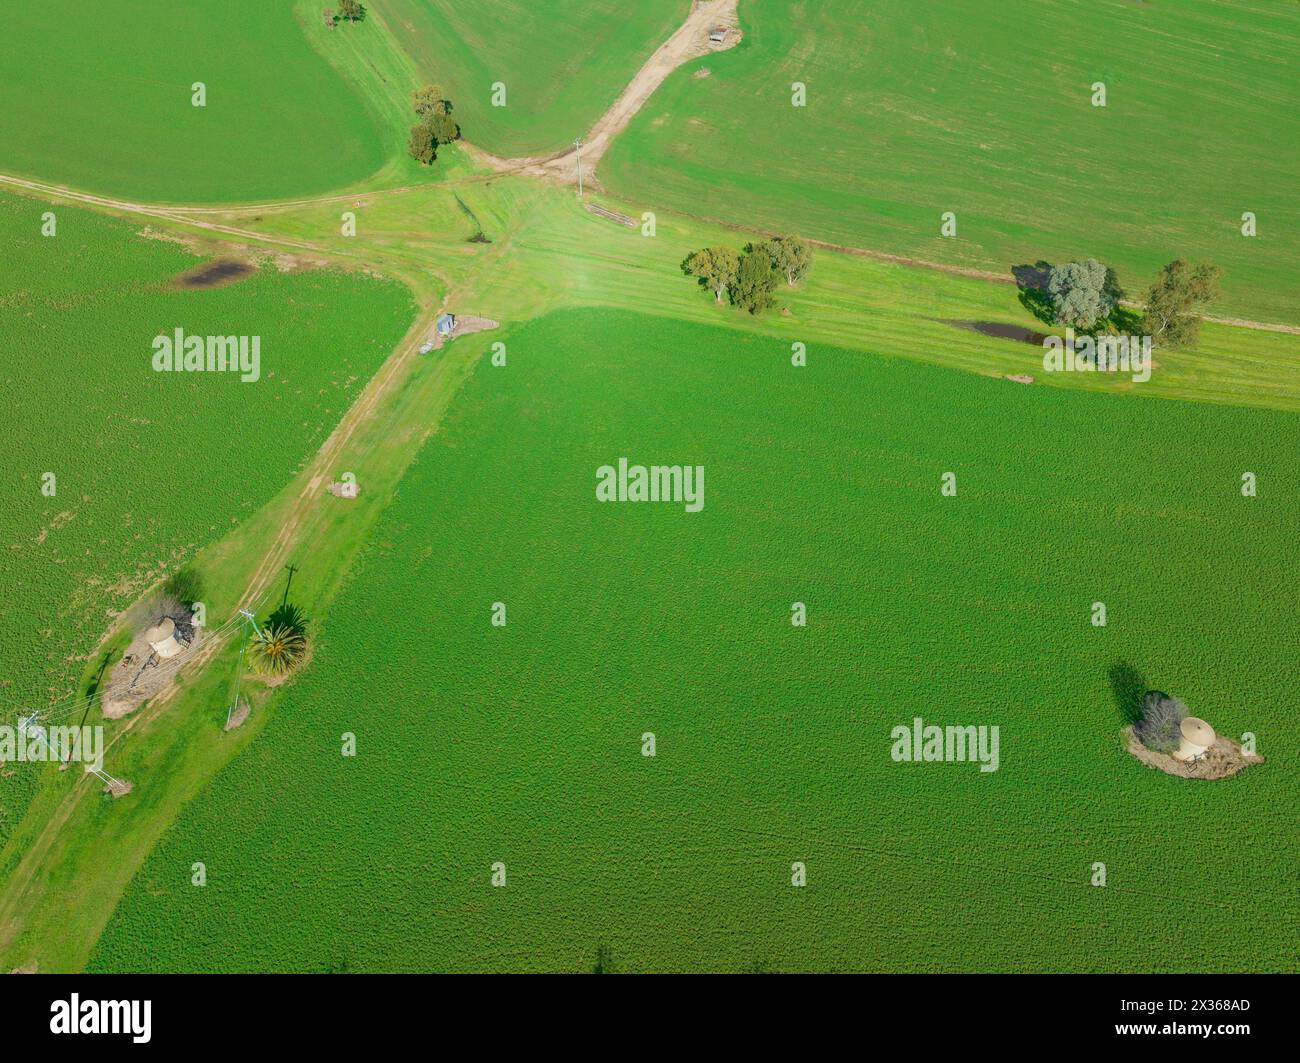 Aerial view of a green field with wheel tracks all running to a central point at Tamworth in New South Wales, Australia. Stock Photo